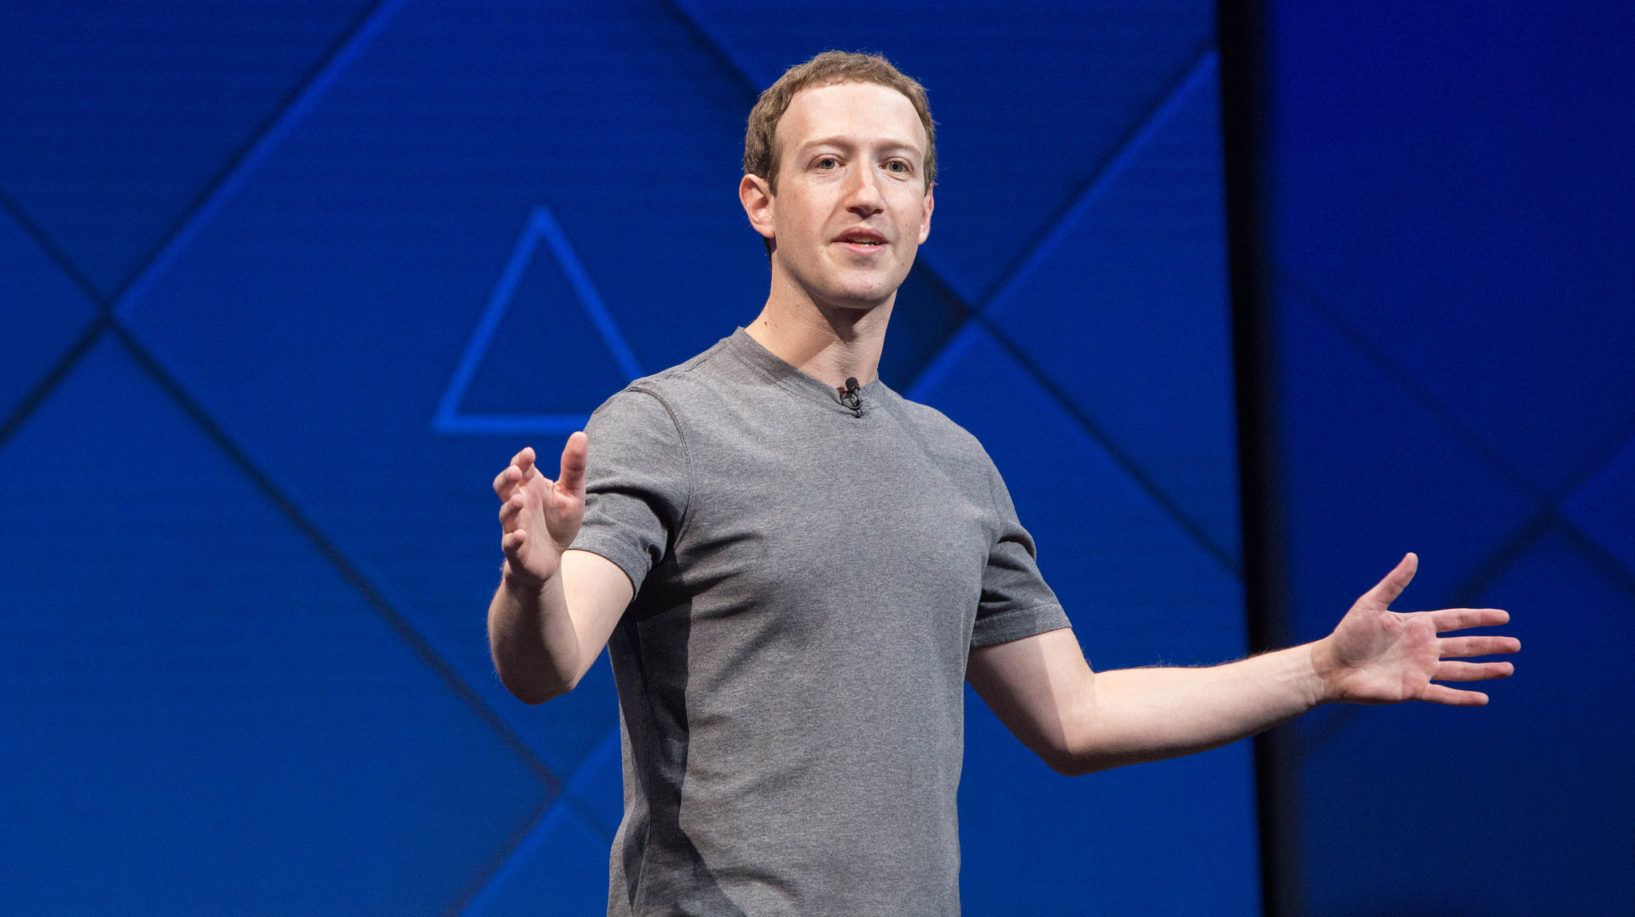 Facebook is planning to change its company name soon